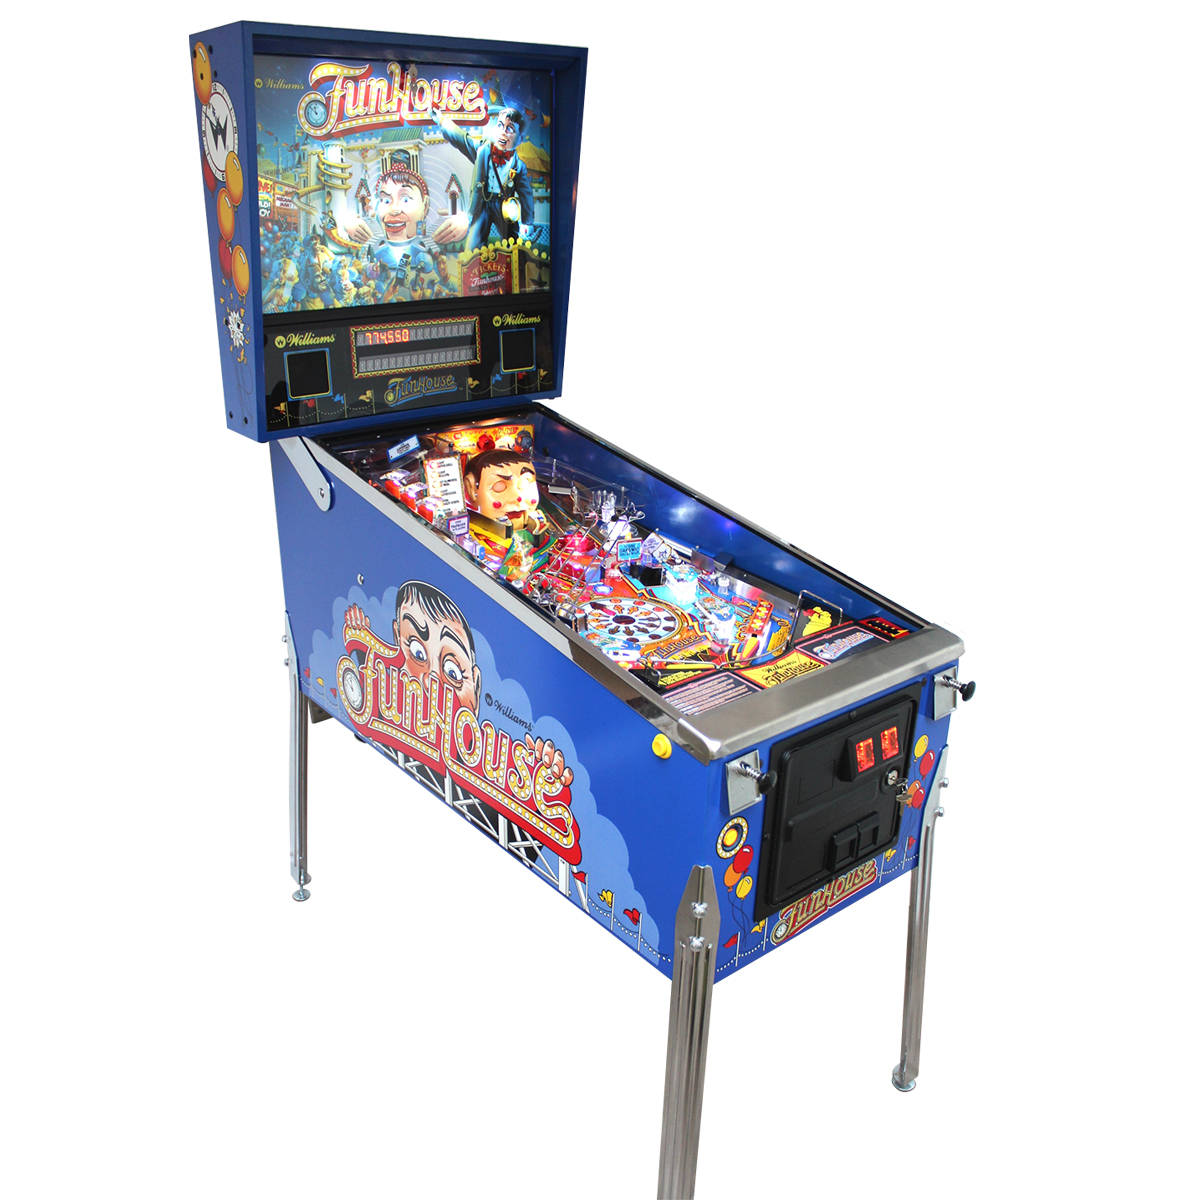 Buy Funhouse Pinball Machine by Williams Online at $9999